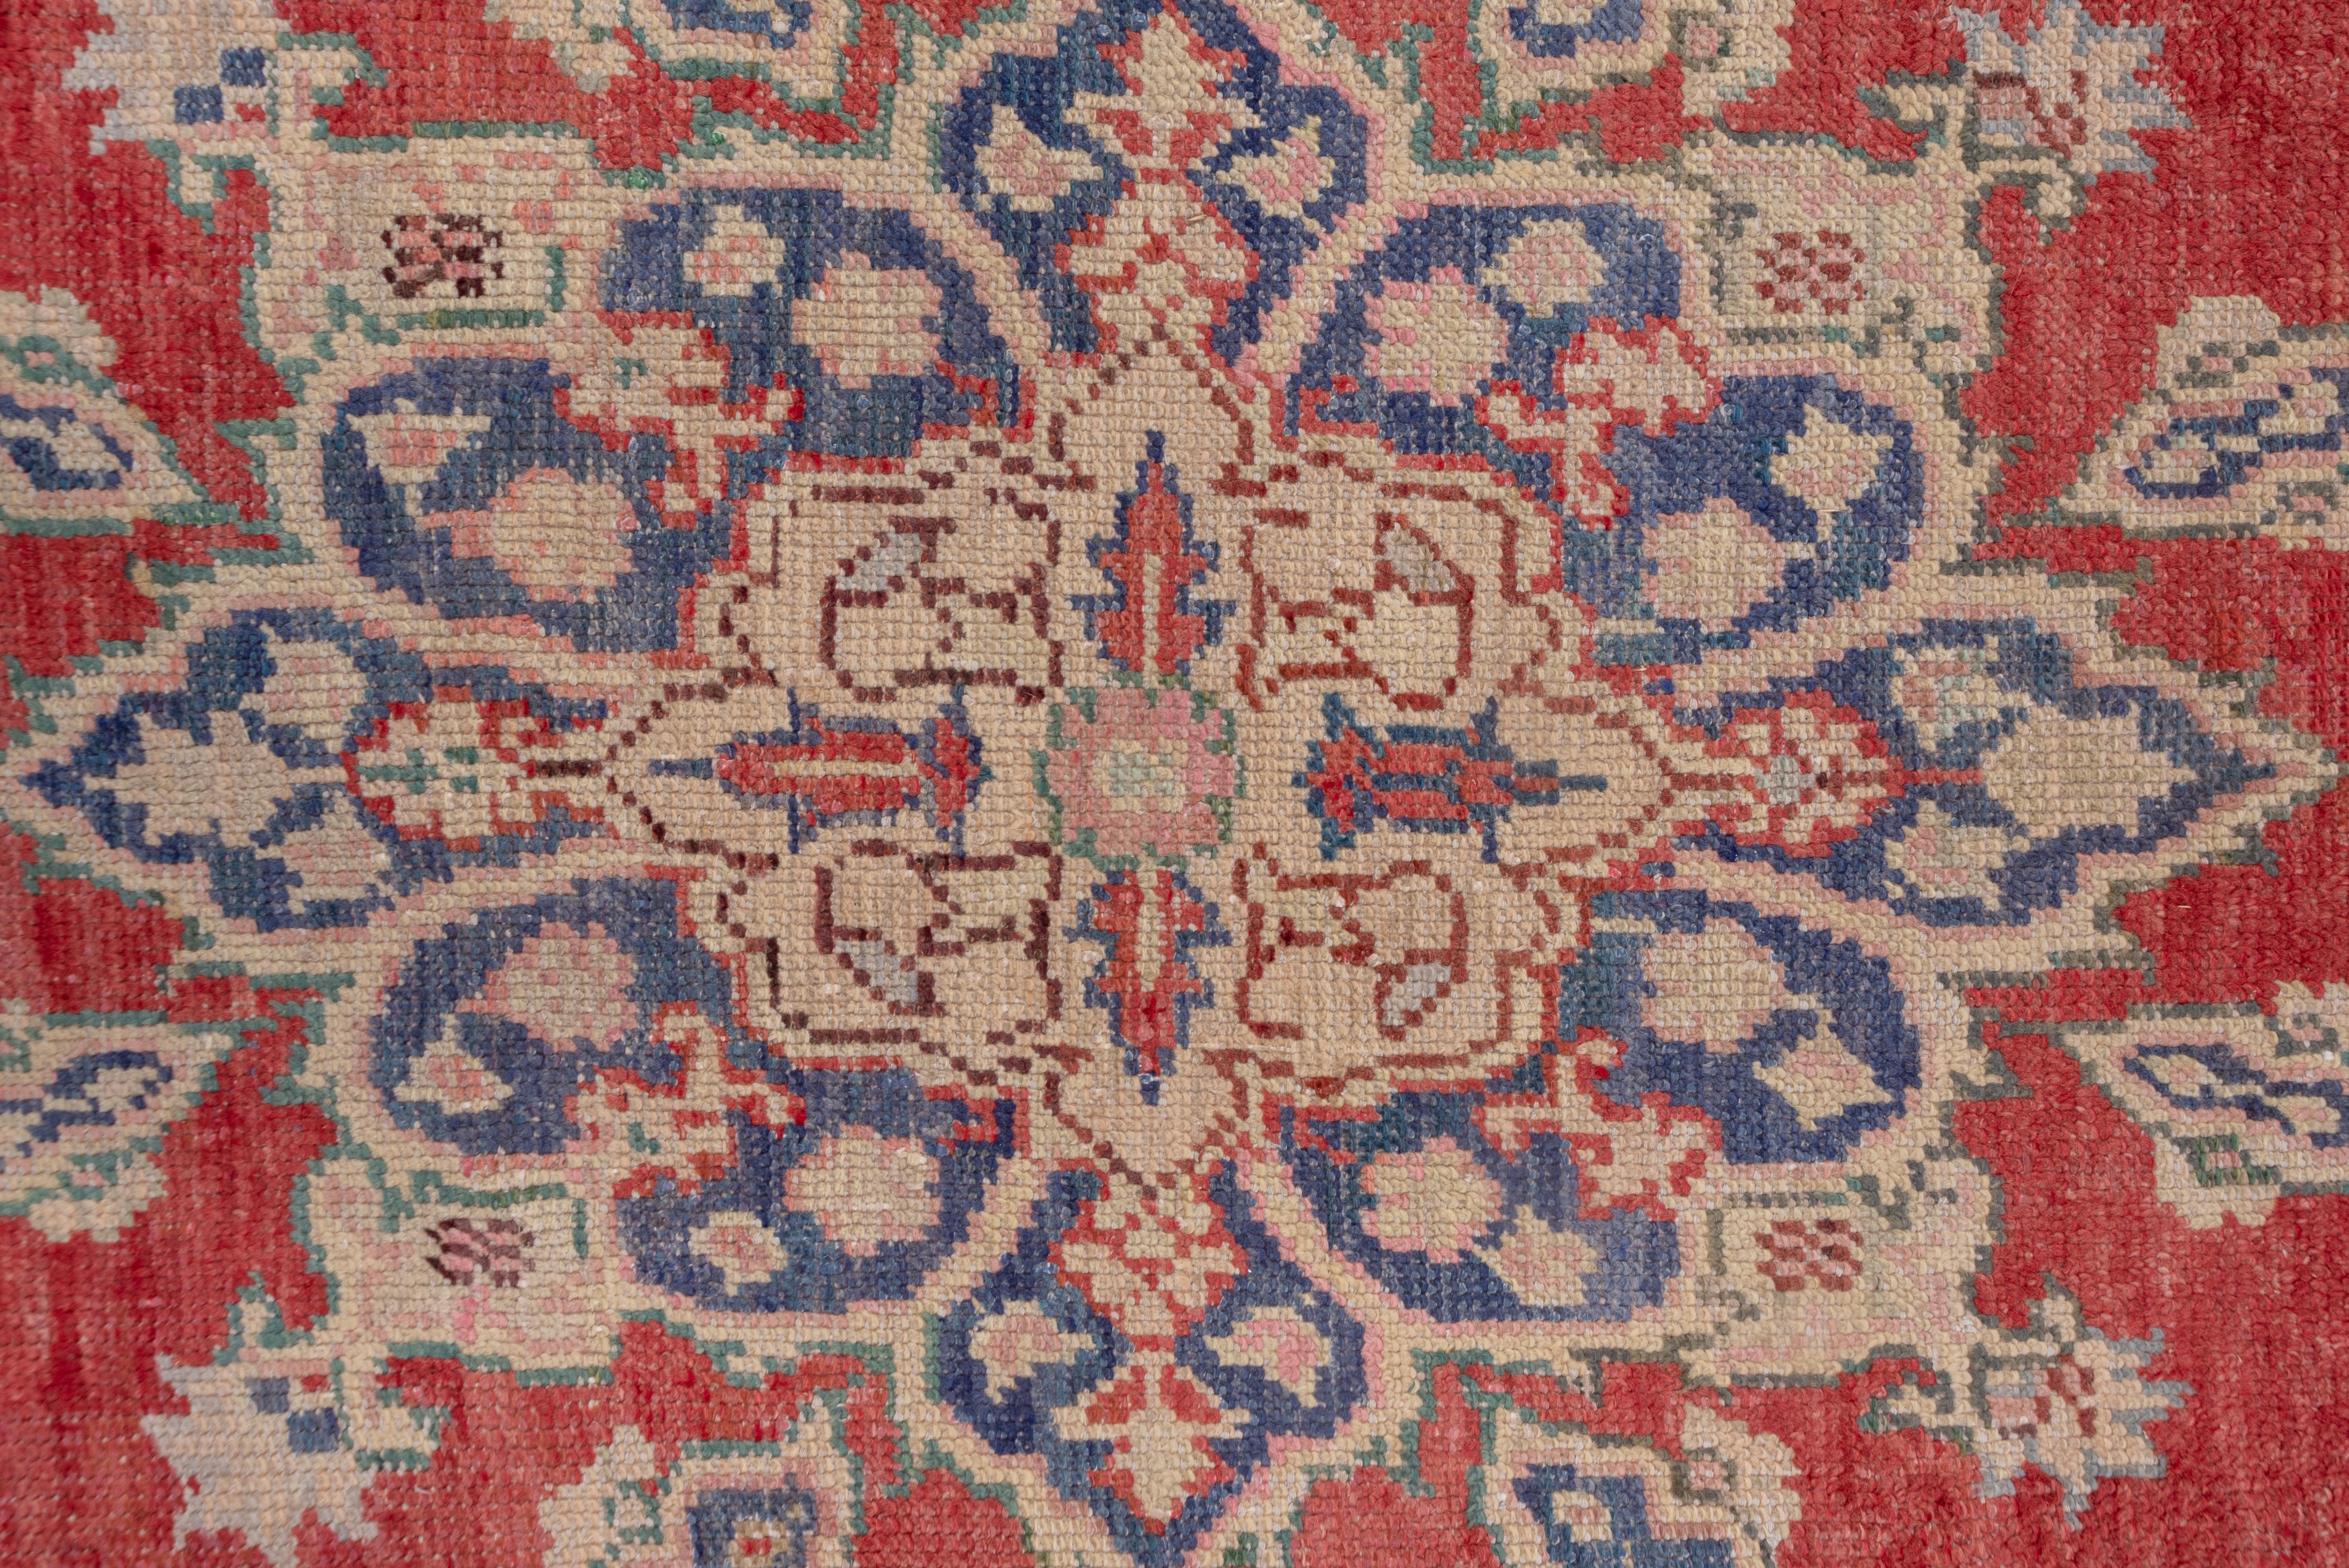 Hand-Knotted Turkish Red Oushak Carpet, circa 1920s